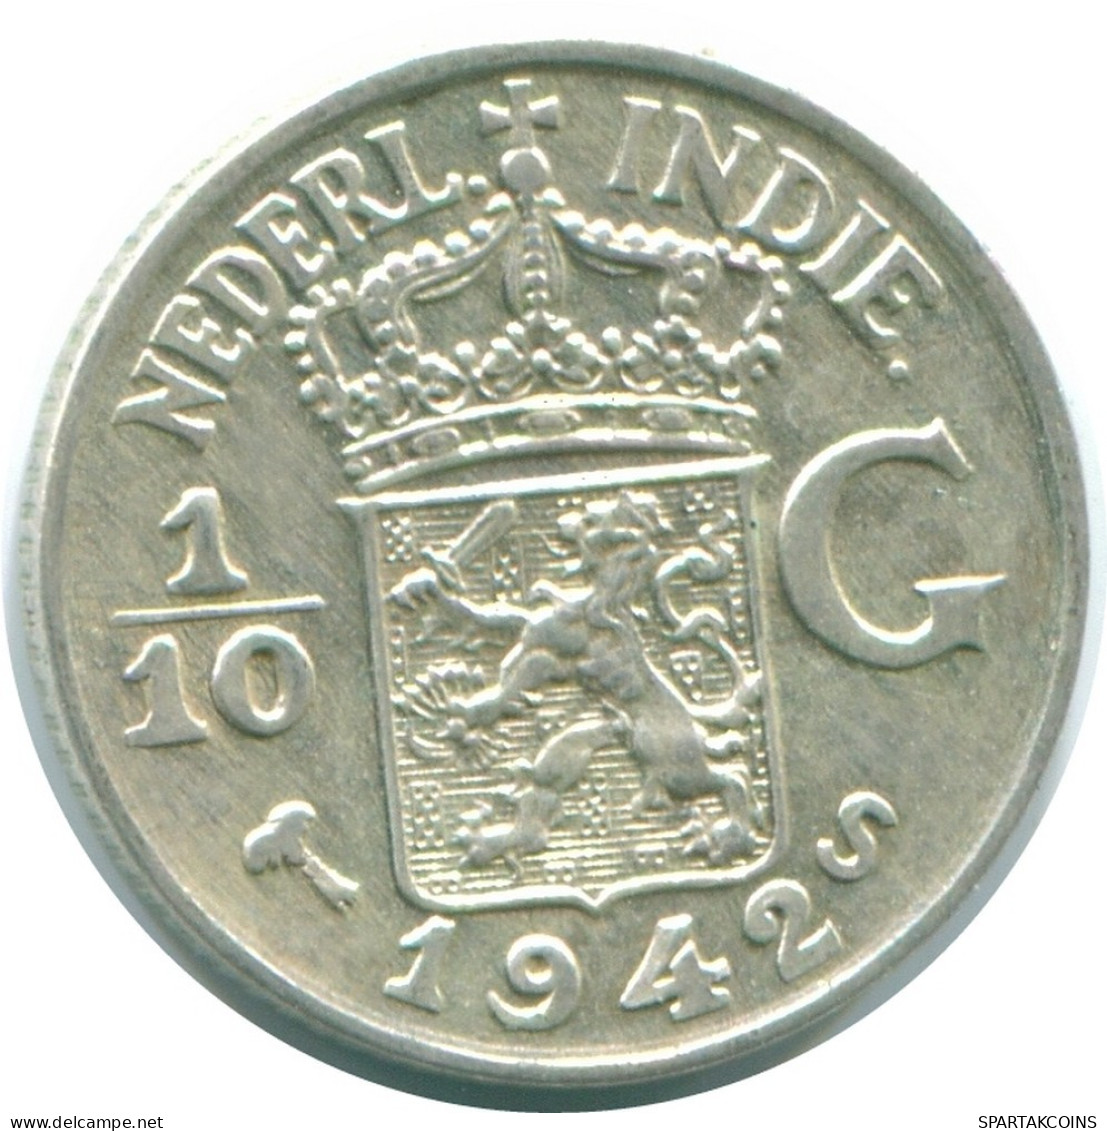 1/10 GULDEN 1942 NETHERLANDS EAST INDIES SILVER Colonial Coin #NL13891.3.U.A - Dutch East Indies